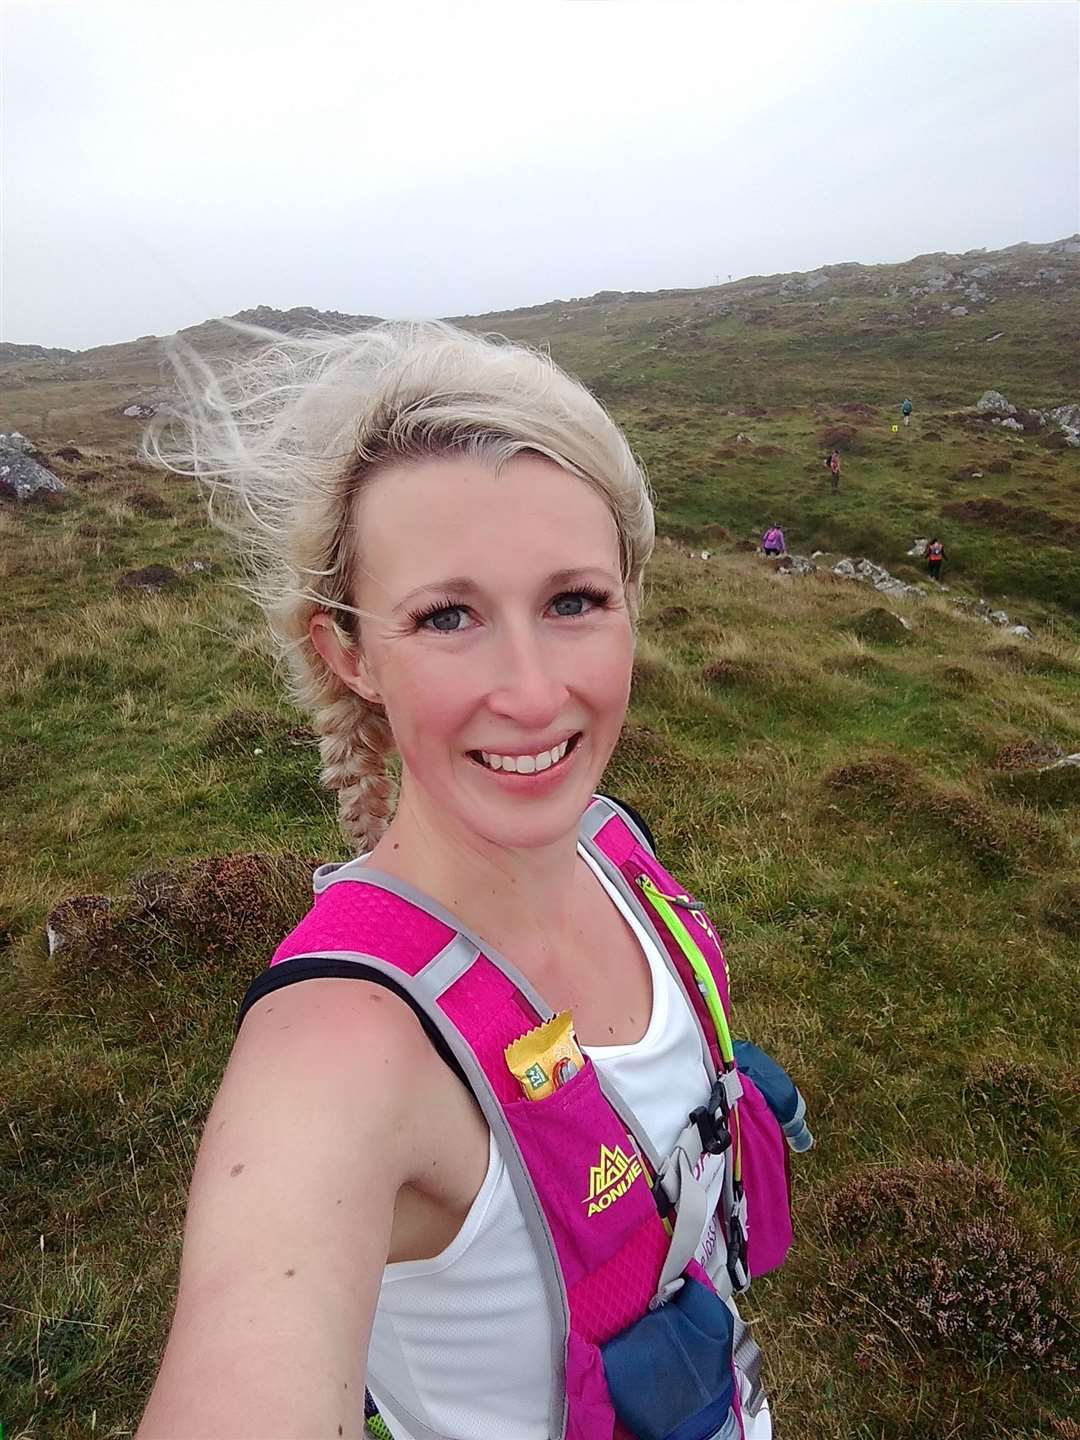 Rebecca stopped to take lots of pictures during the Tiree Ultramarathon.